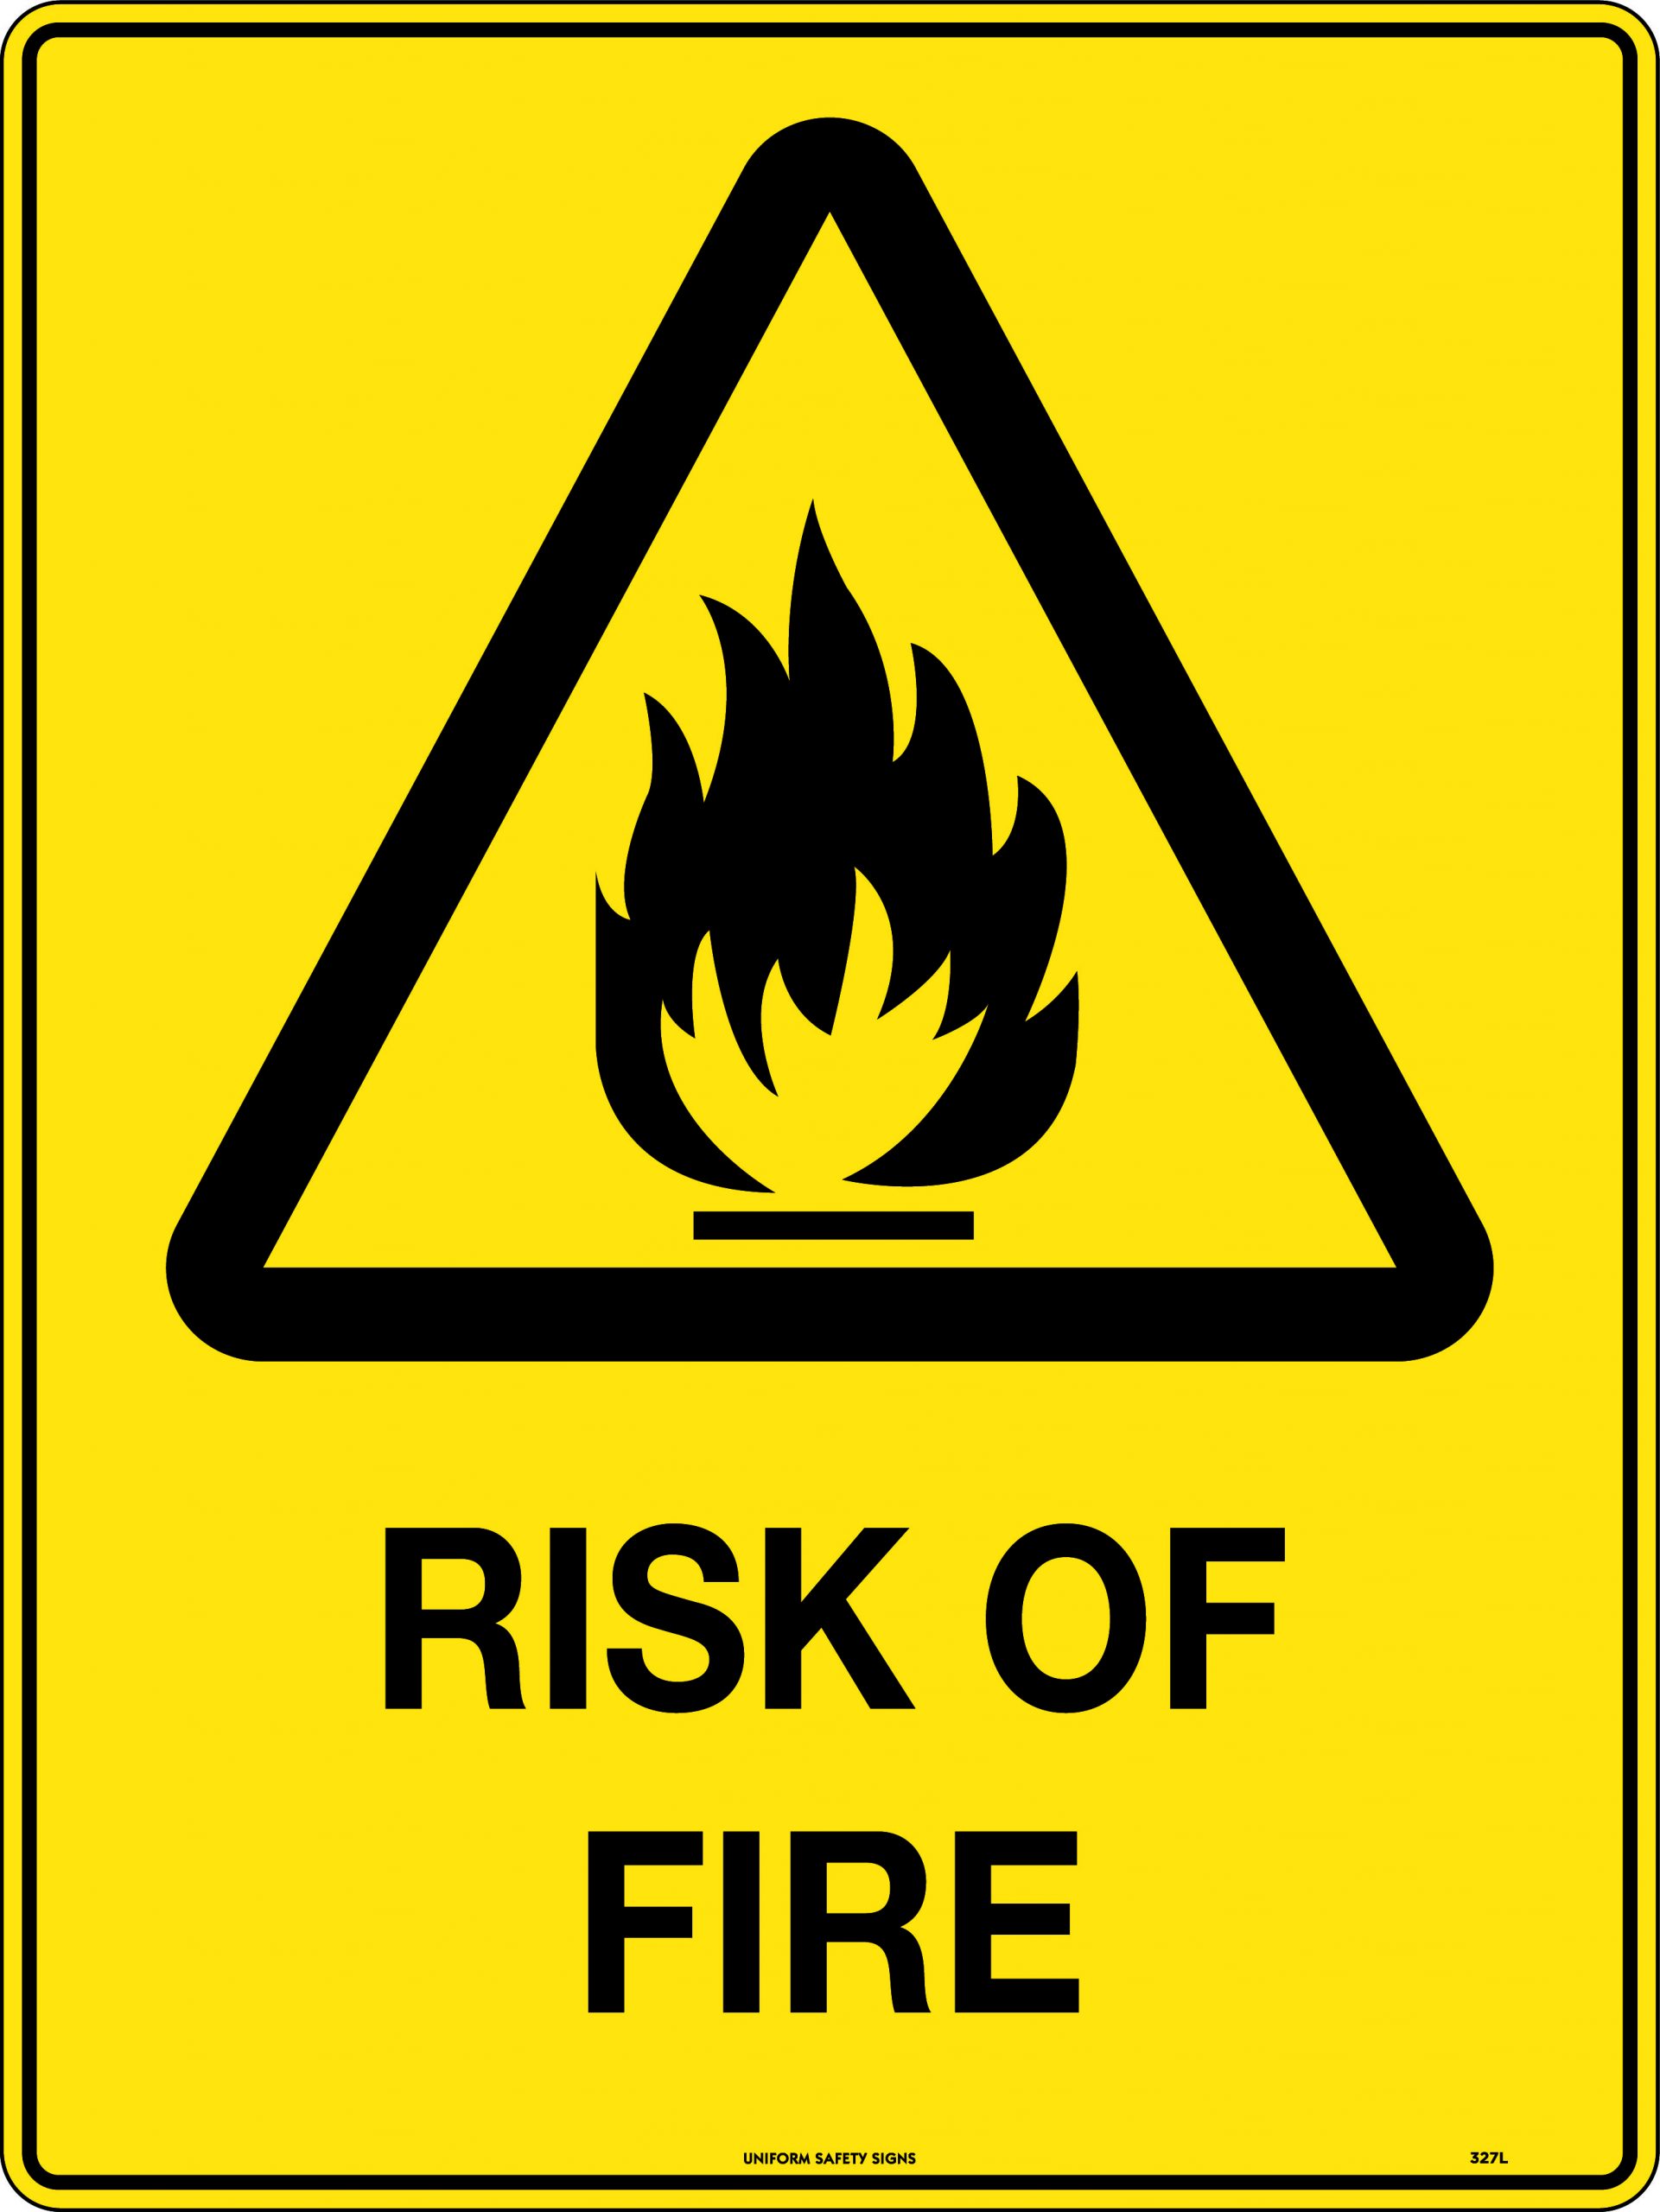 Caution Risk of Fire  Uniform Safety Signs 